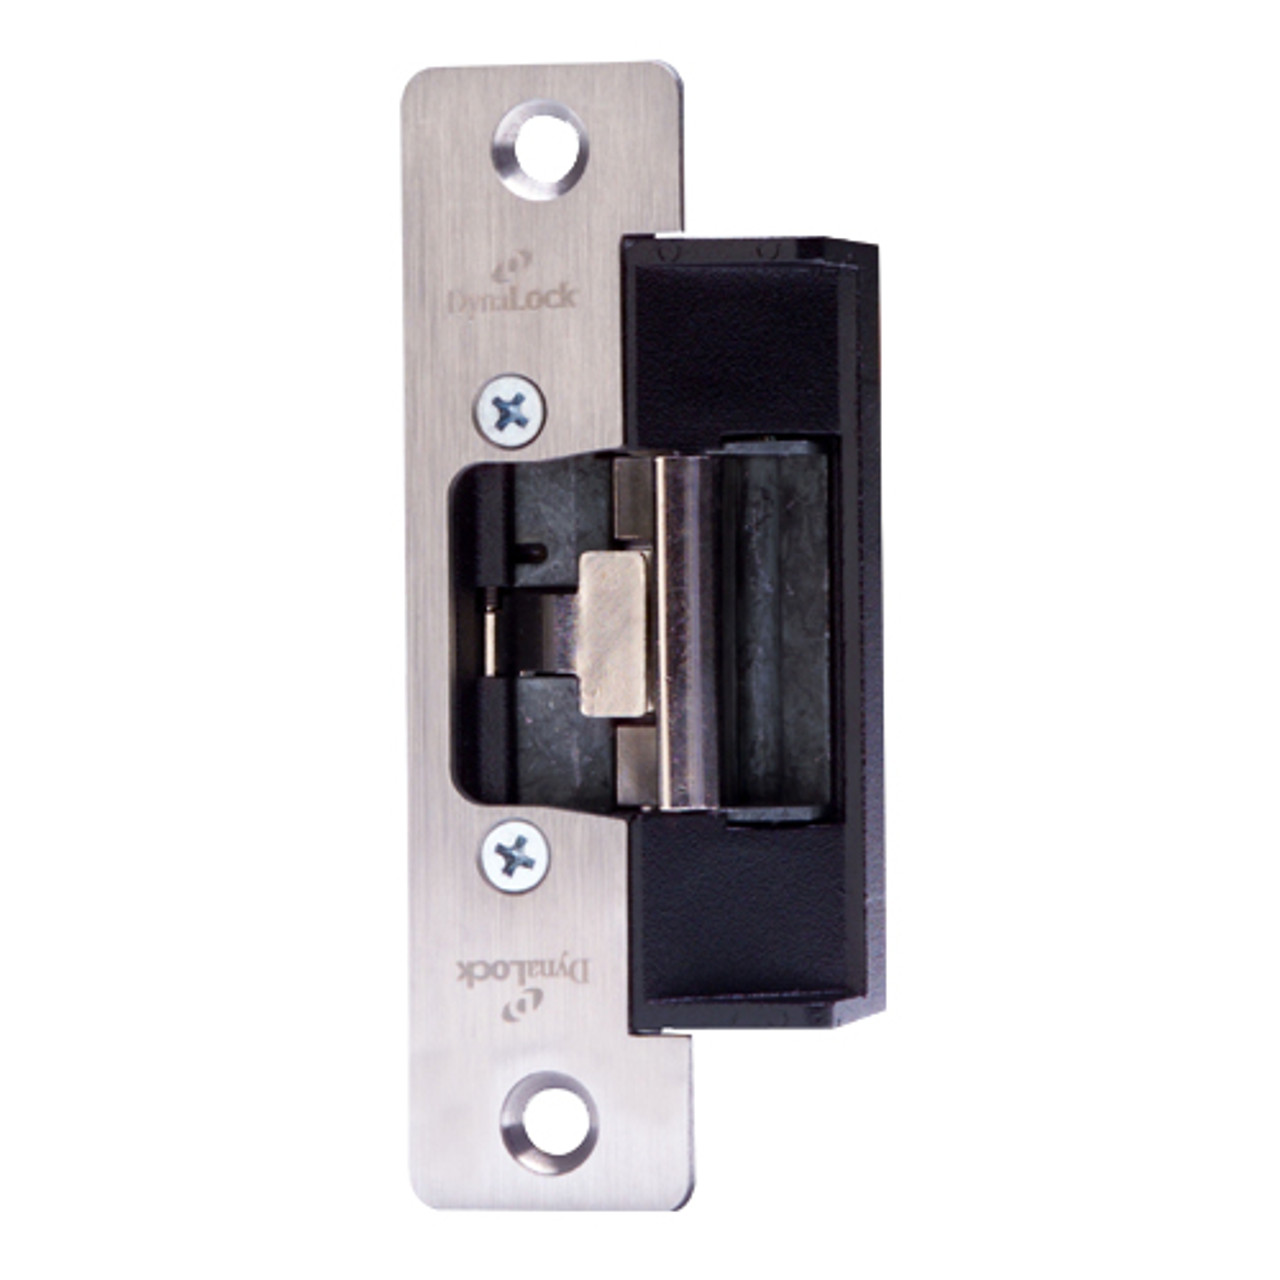 1604S-US32 DynaLock 1600 Series Electric Strike for Standard Profile in Bright Stainless Steel